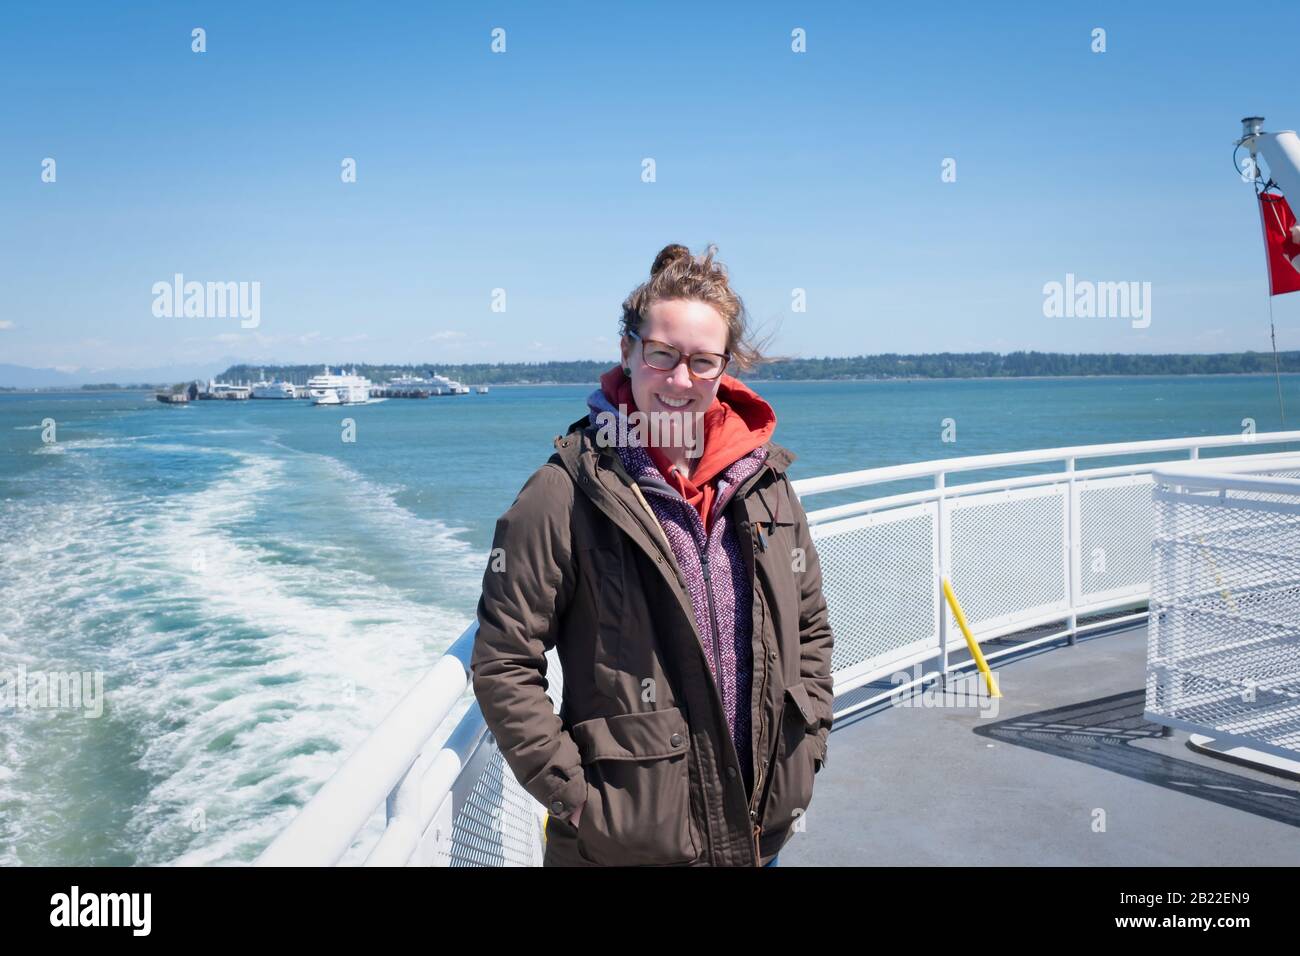 Smiling young woman on ferry Vancouver to Swartz Bay, Vancouver Island British Columbia Canada. Stock Photo